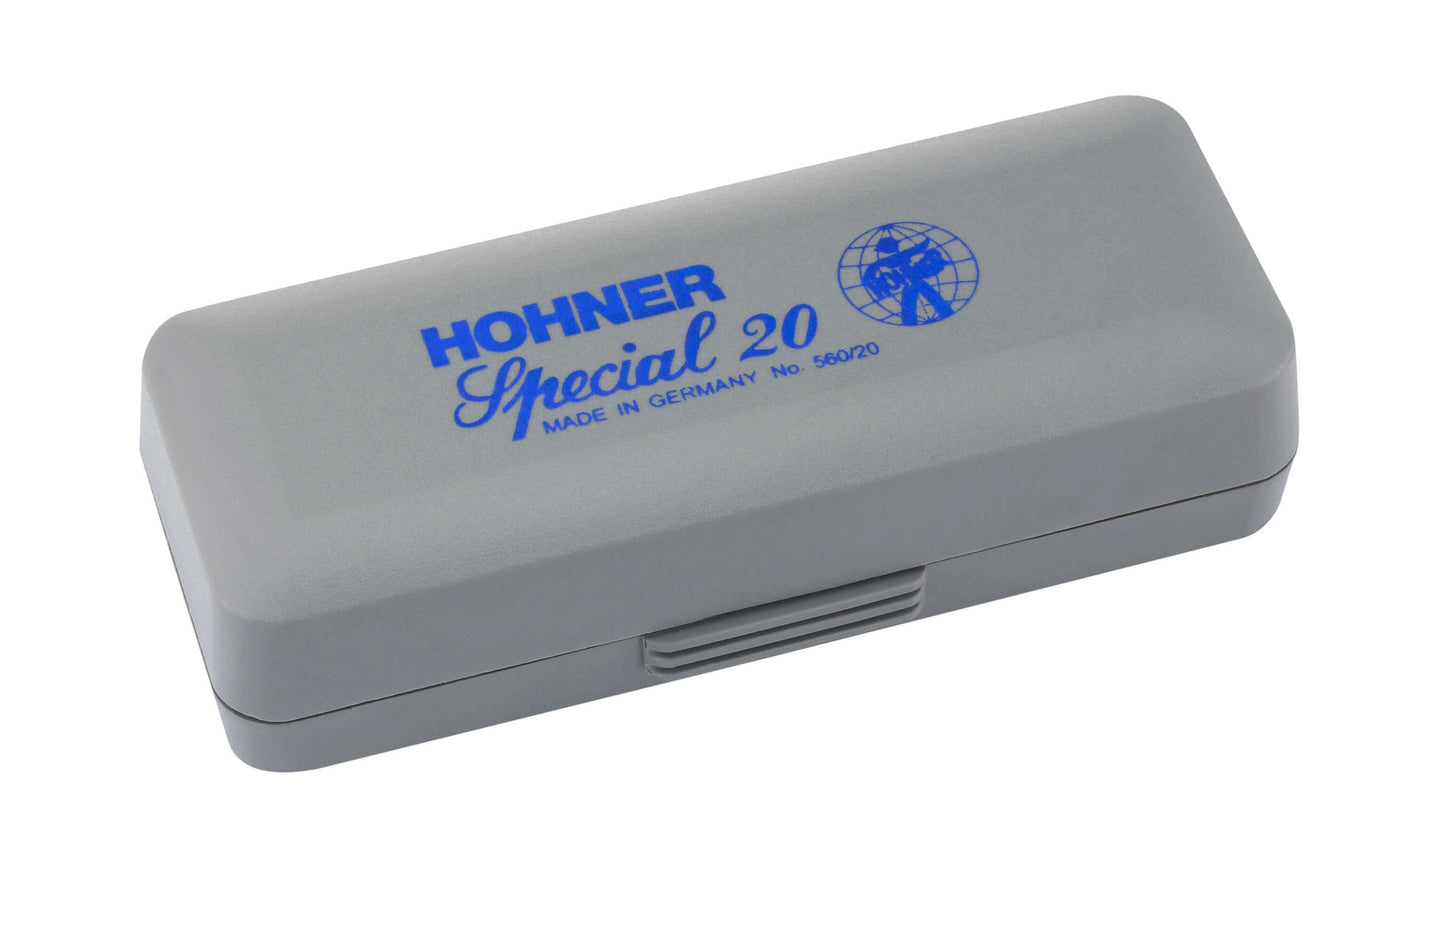 SPECIAL 20 HARMONICA BOXED KEY OF G